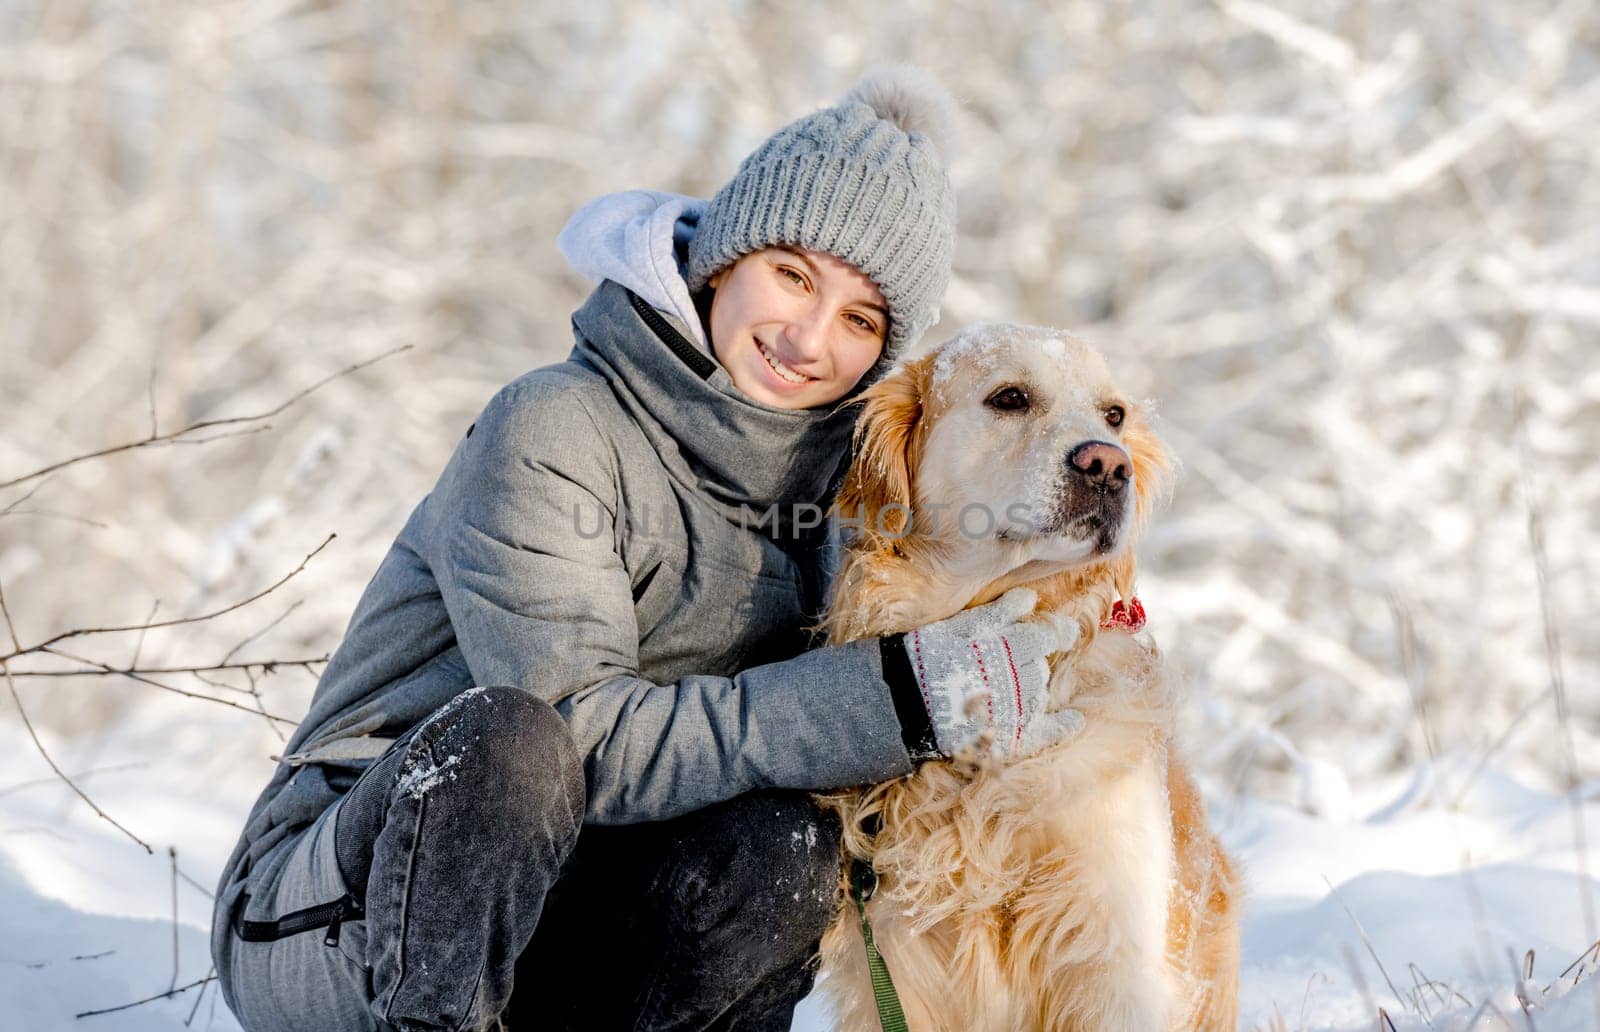 Teenage Girl And Golden Retriever In Winter Forest by tan4ikk1